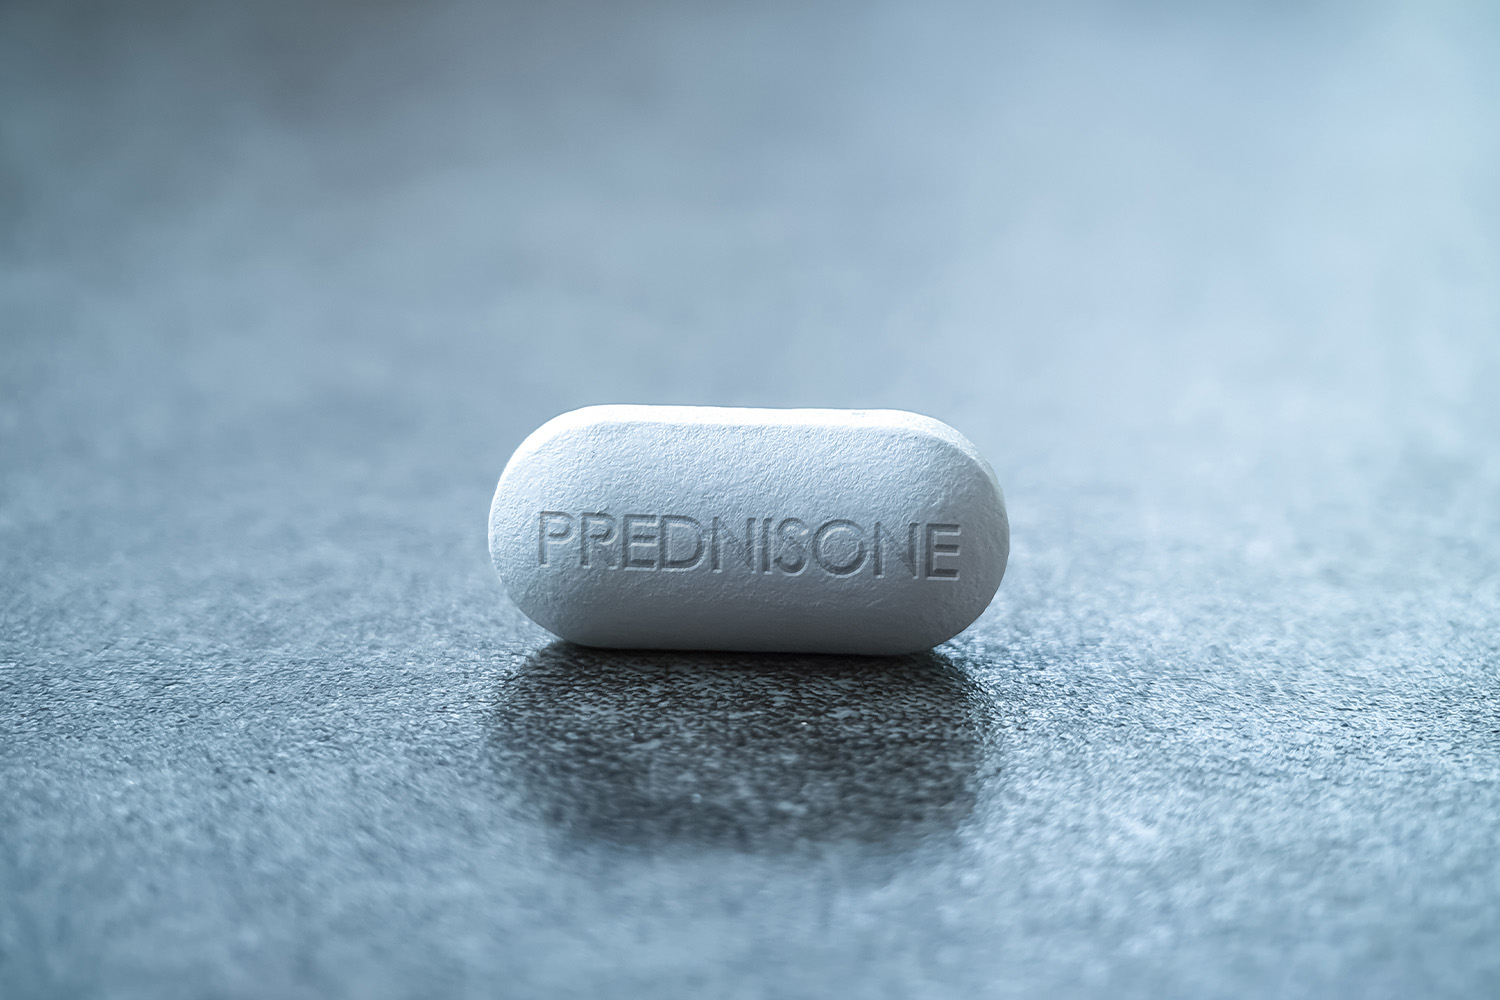 Prednisone for Dogs 101: Uses & Side Effects